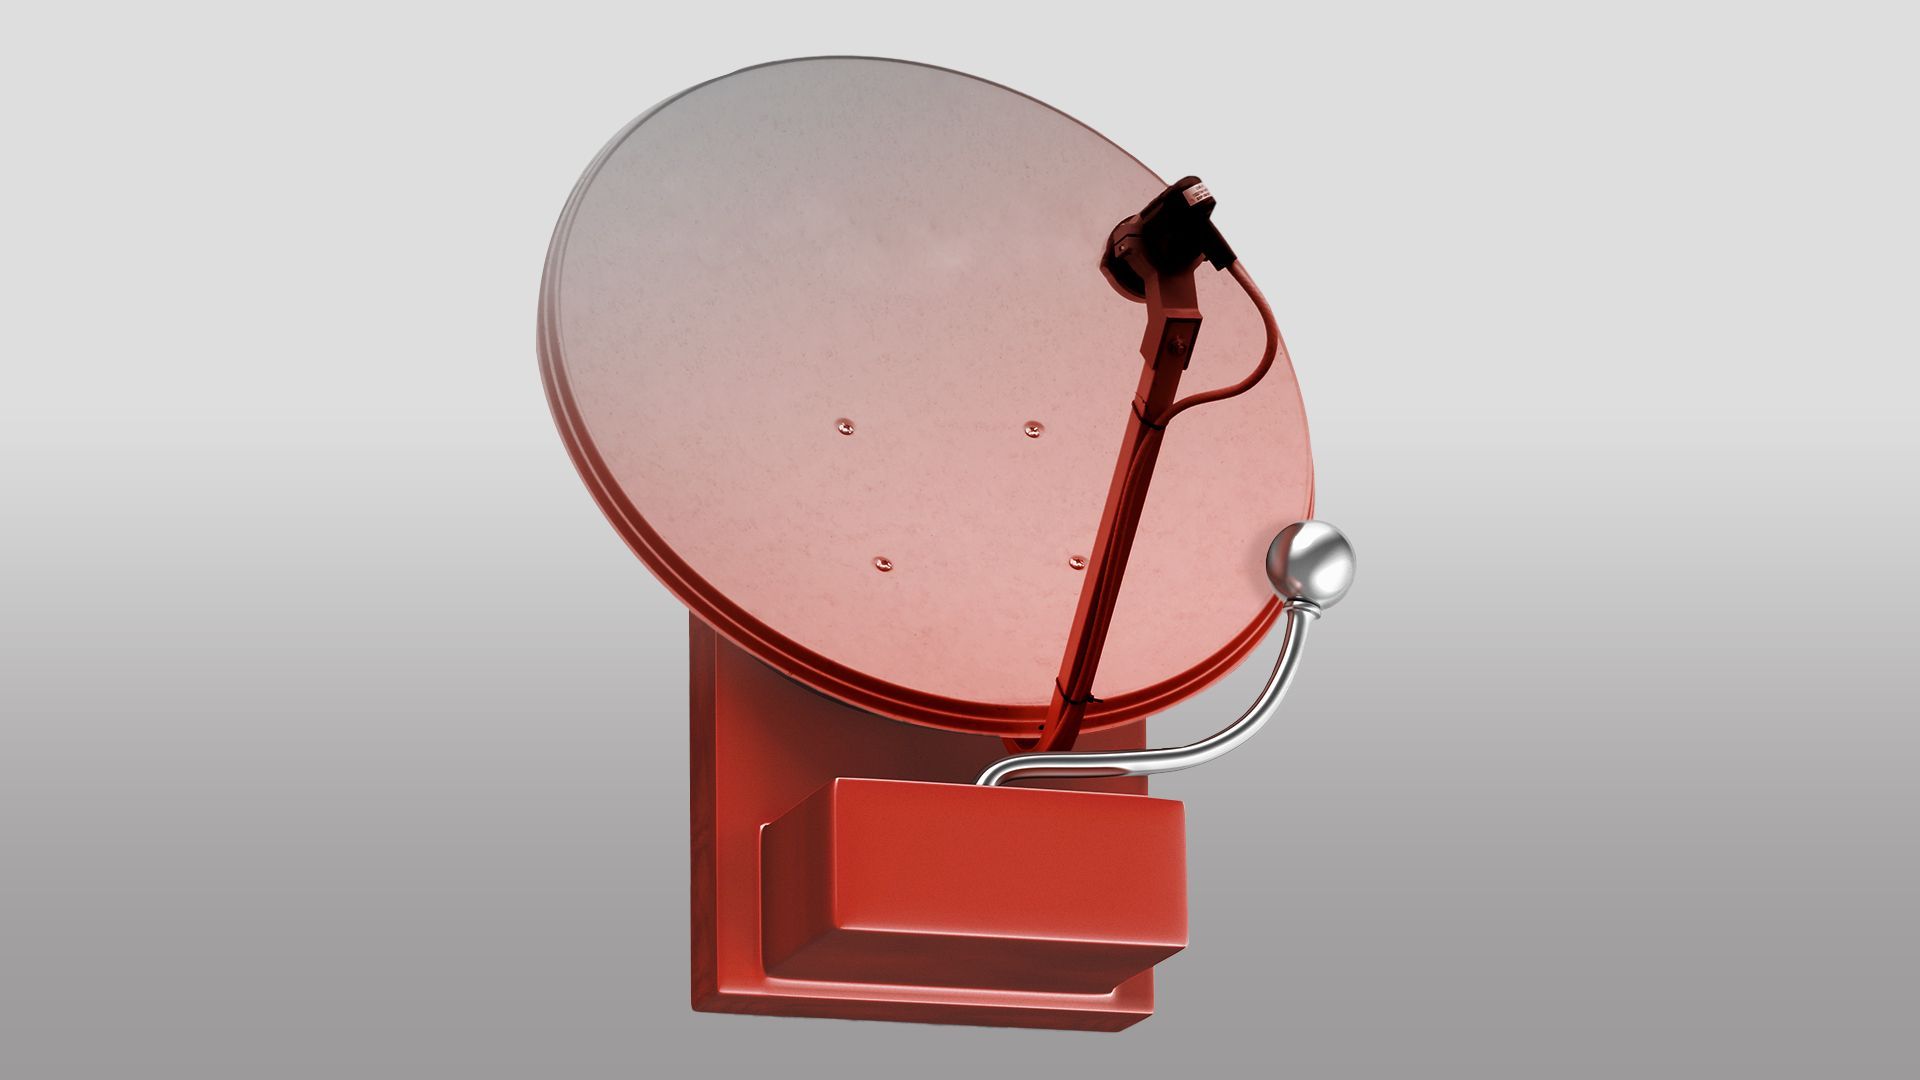 Illustration of a satellite dish and fire alarm bell combined